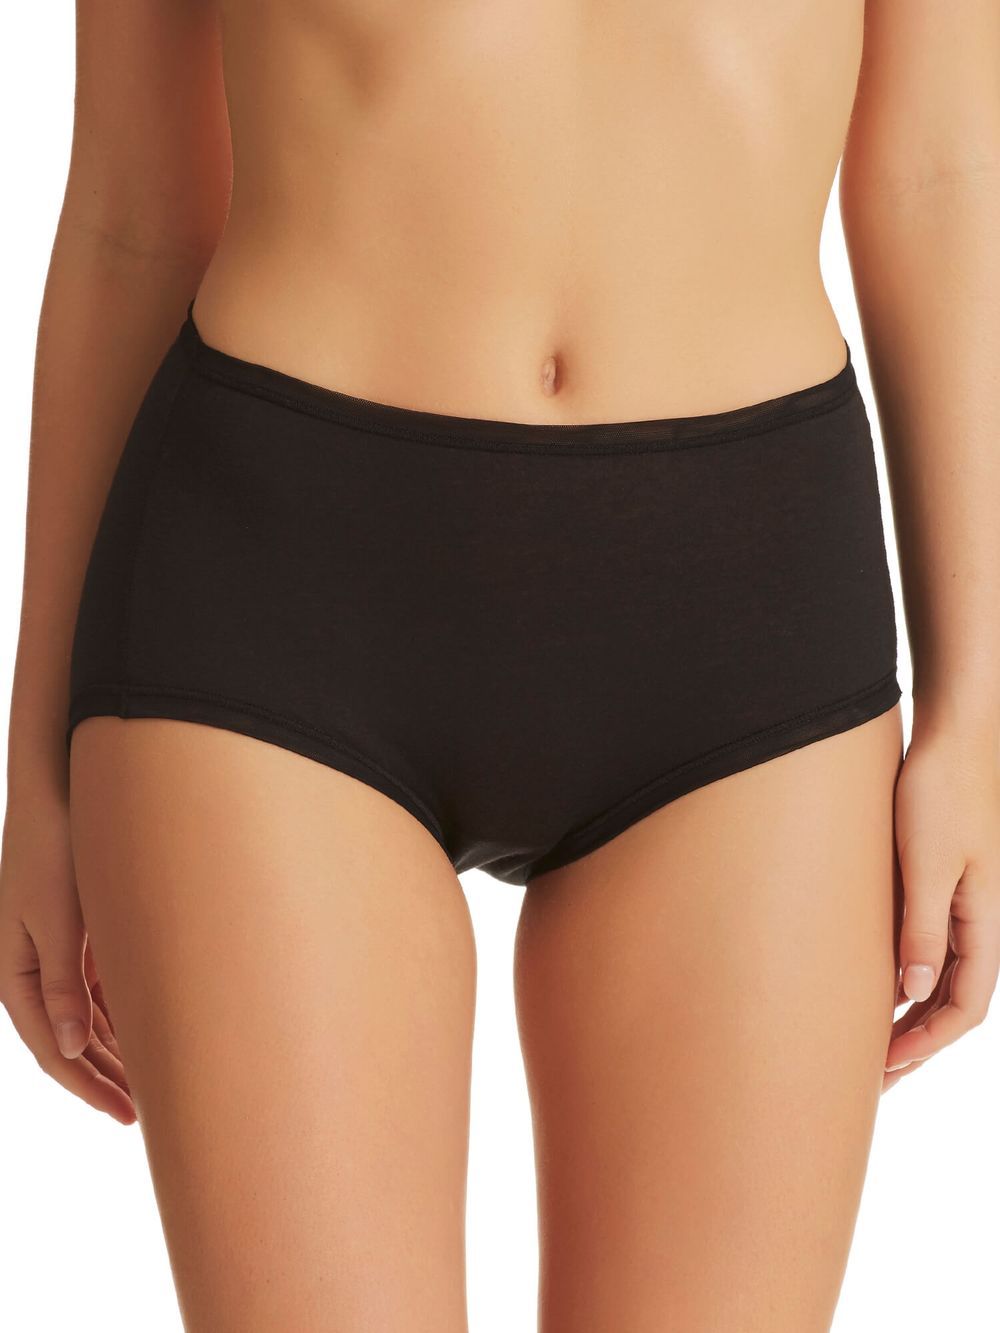 Kayser Pure Cotton Full Brief 13RFB34 - Briefs Black / 10 / S  Available at Illusions Lingerie